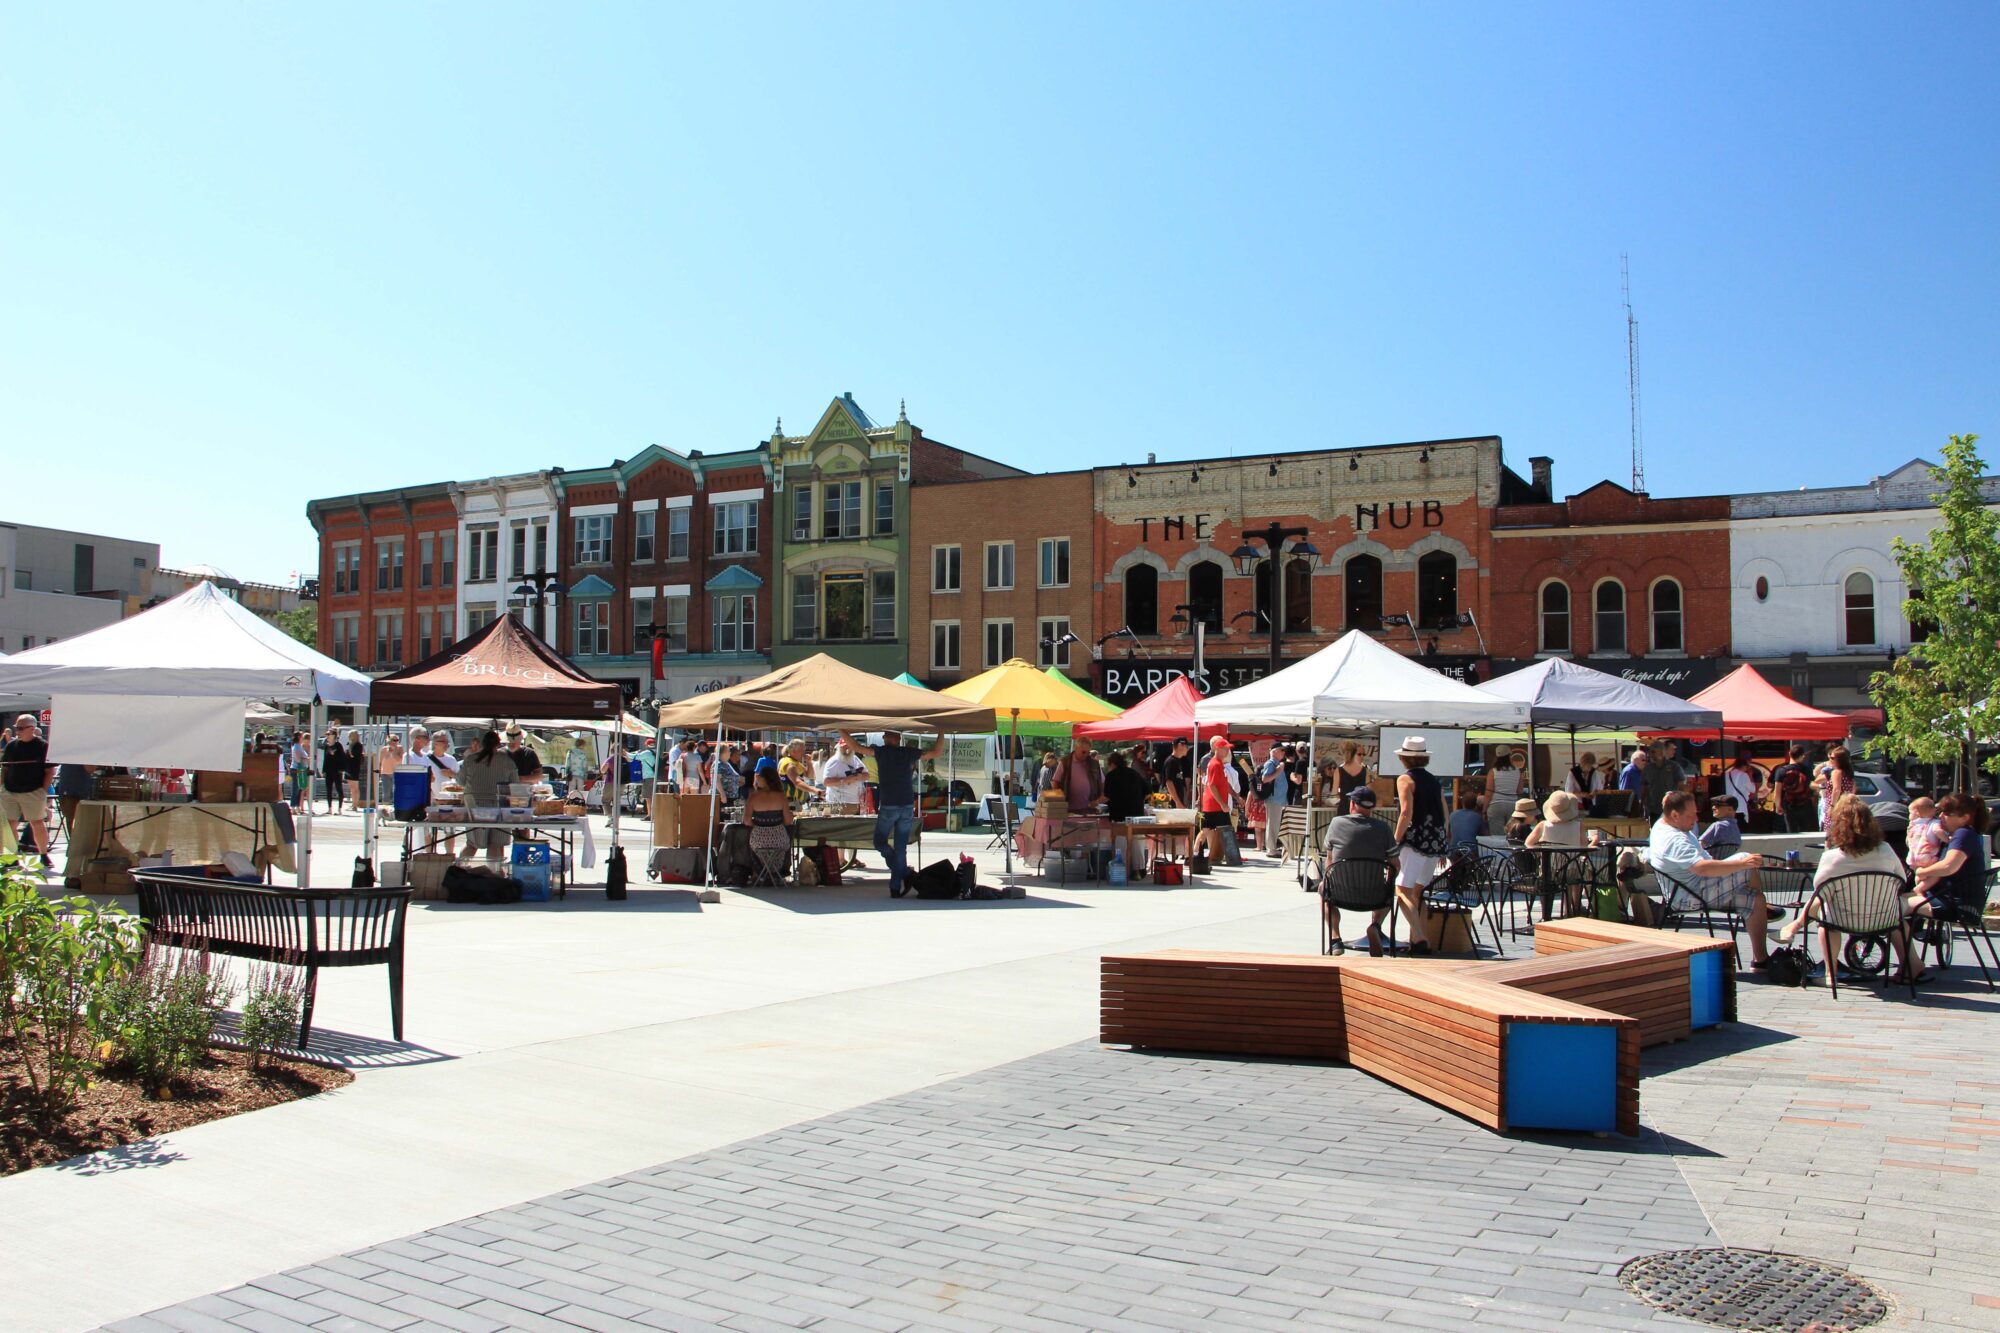 A group of vendors with tents up at Stratford Market Square